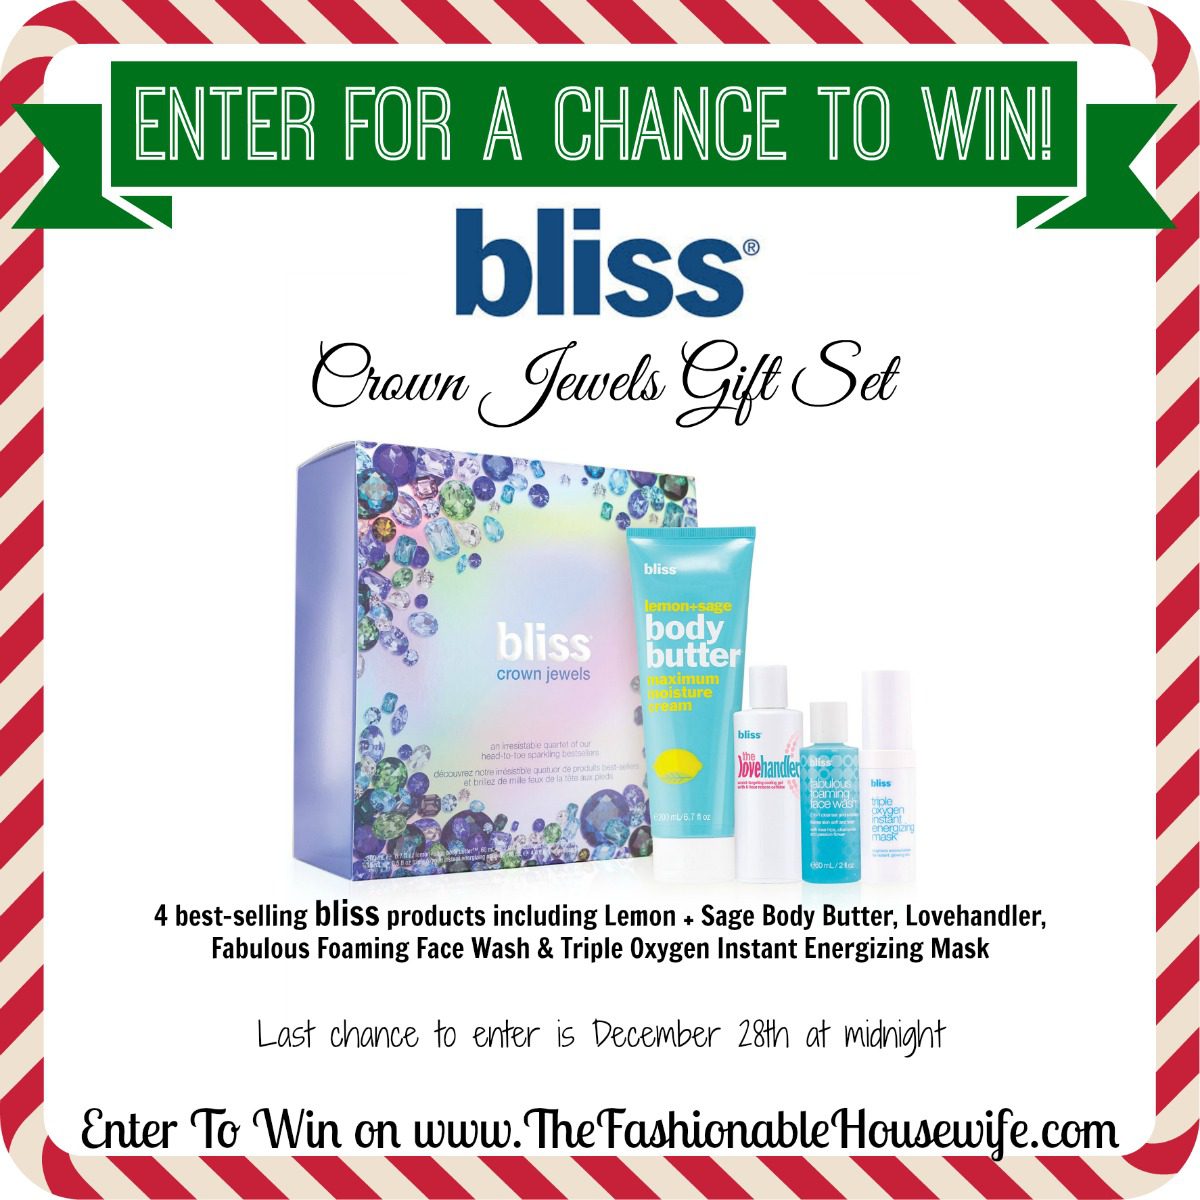 Enter for a chance to win Bliss Crown Jewels Gift Set